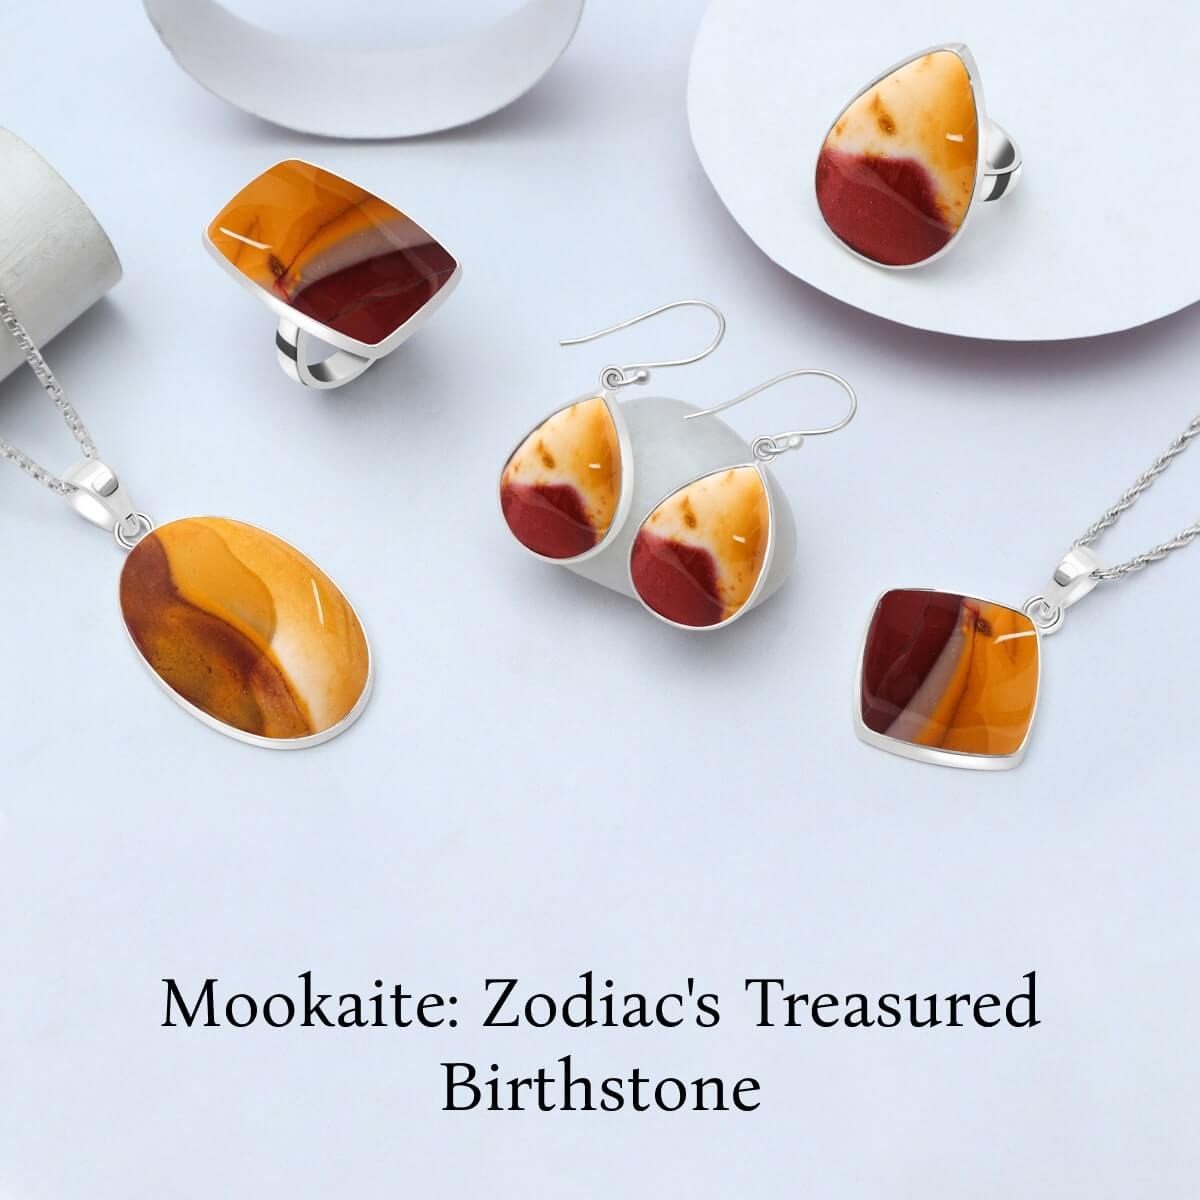 Mookaite is the Birthstone jewelry of which Zodiac Sign